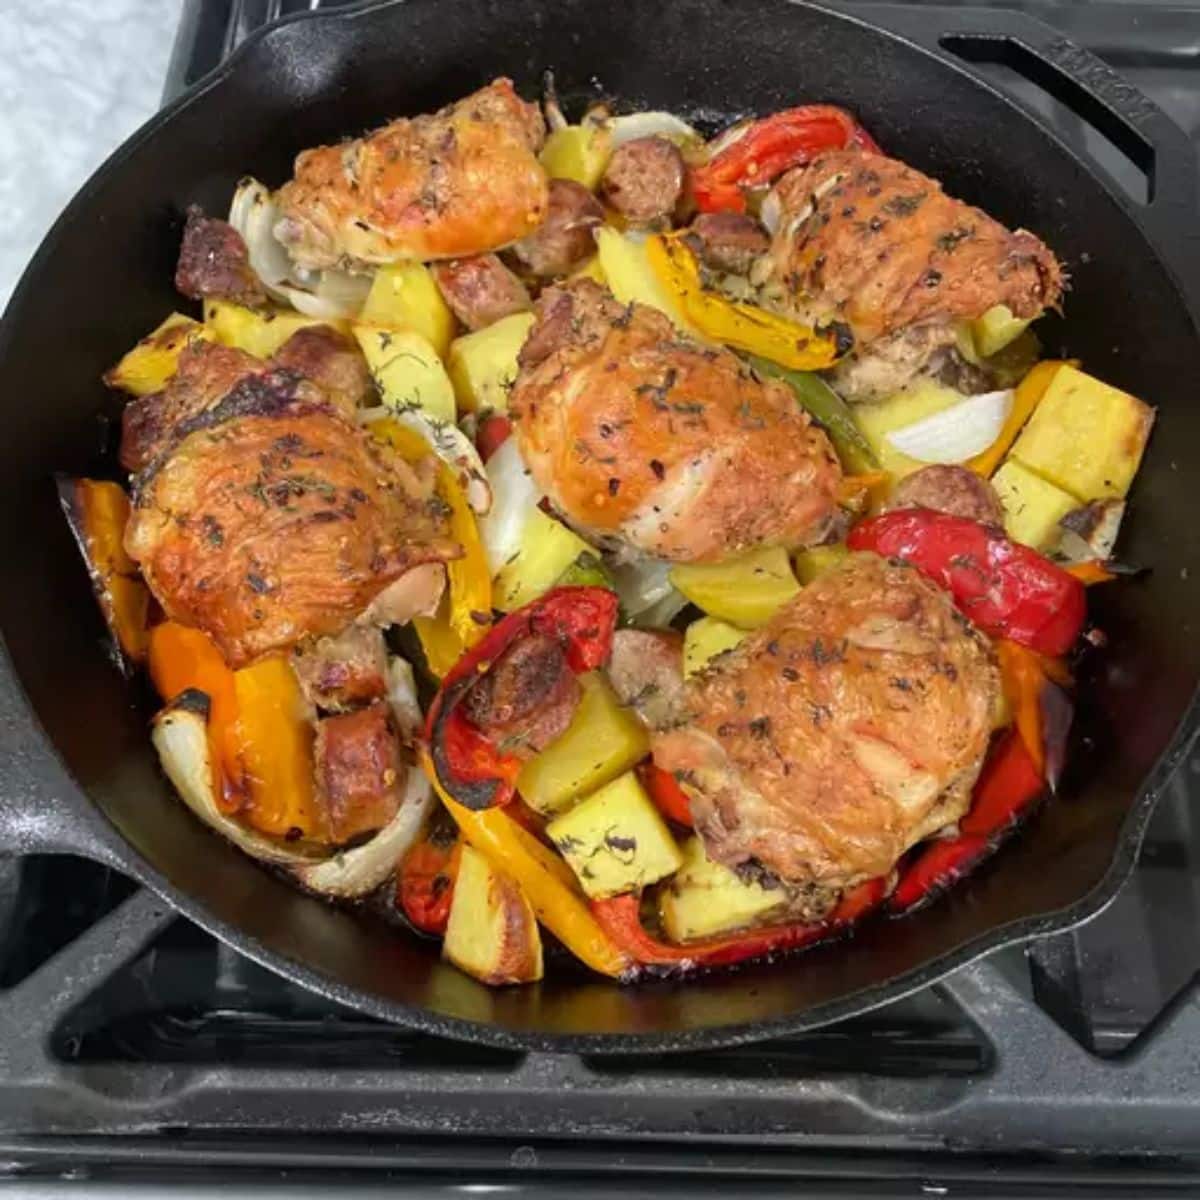 Delicious chicken, sausage, peppers, and potatoes in a black skillet.